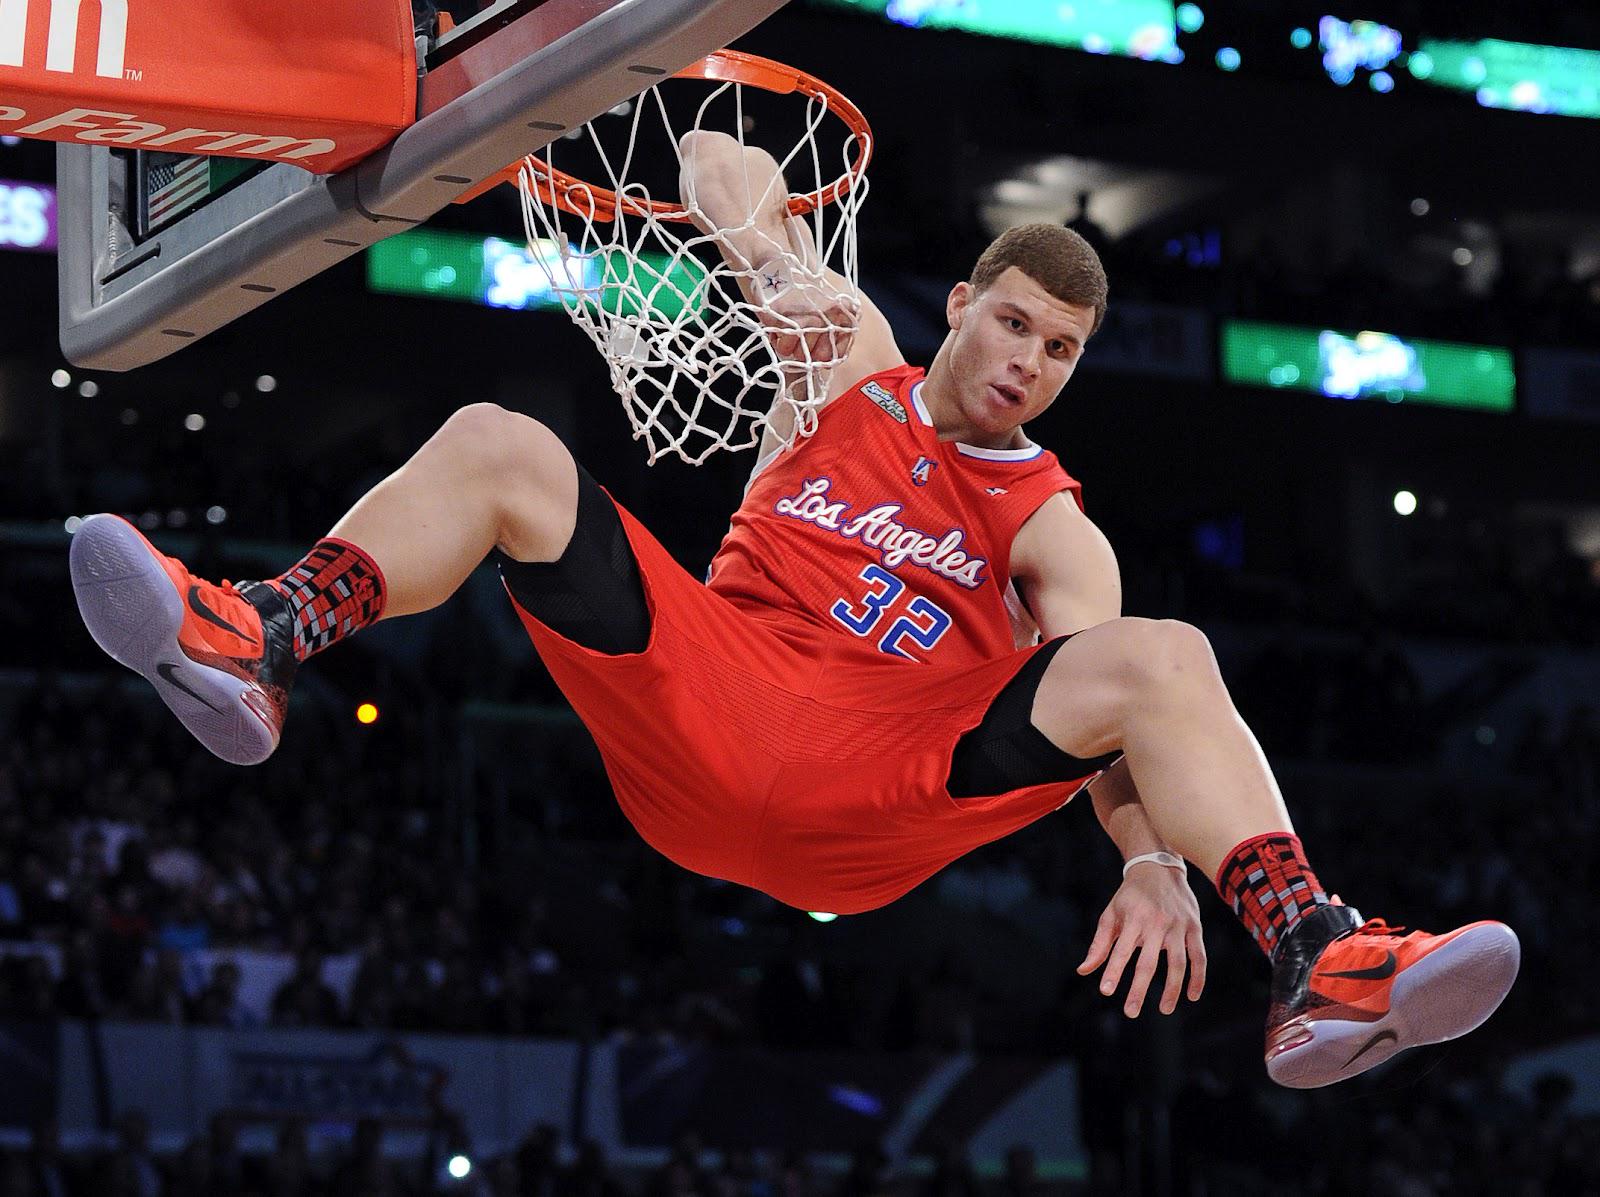 Happy Birthday to Blake Griffin, who turns 26 today! 